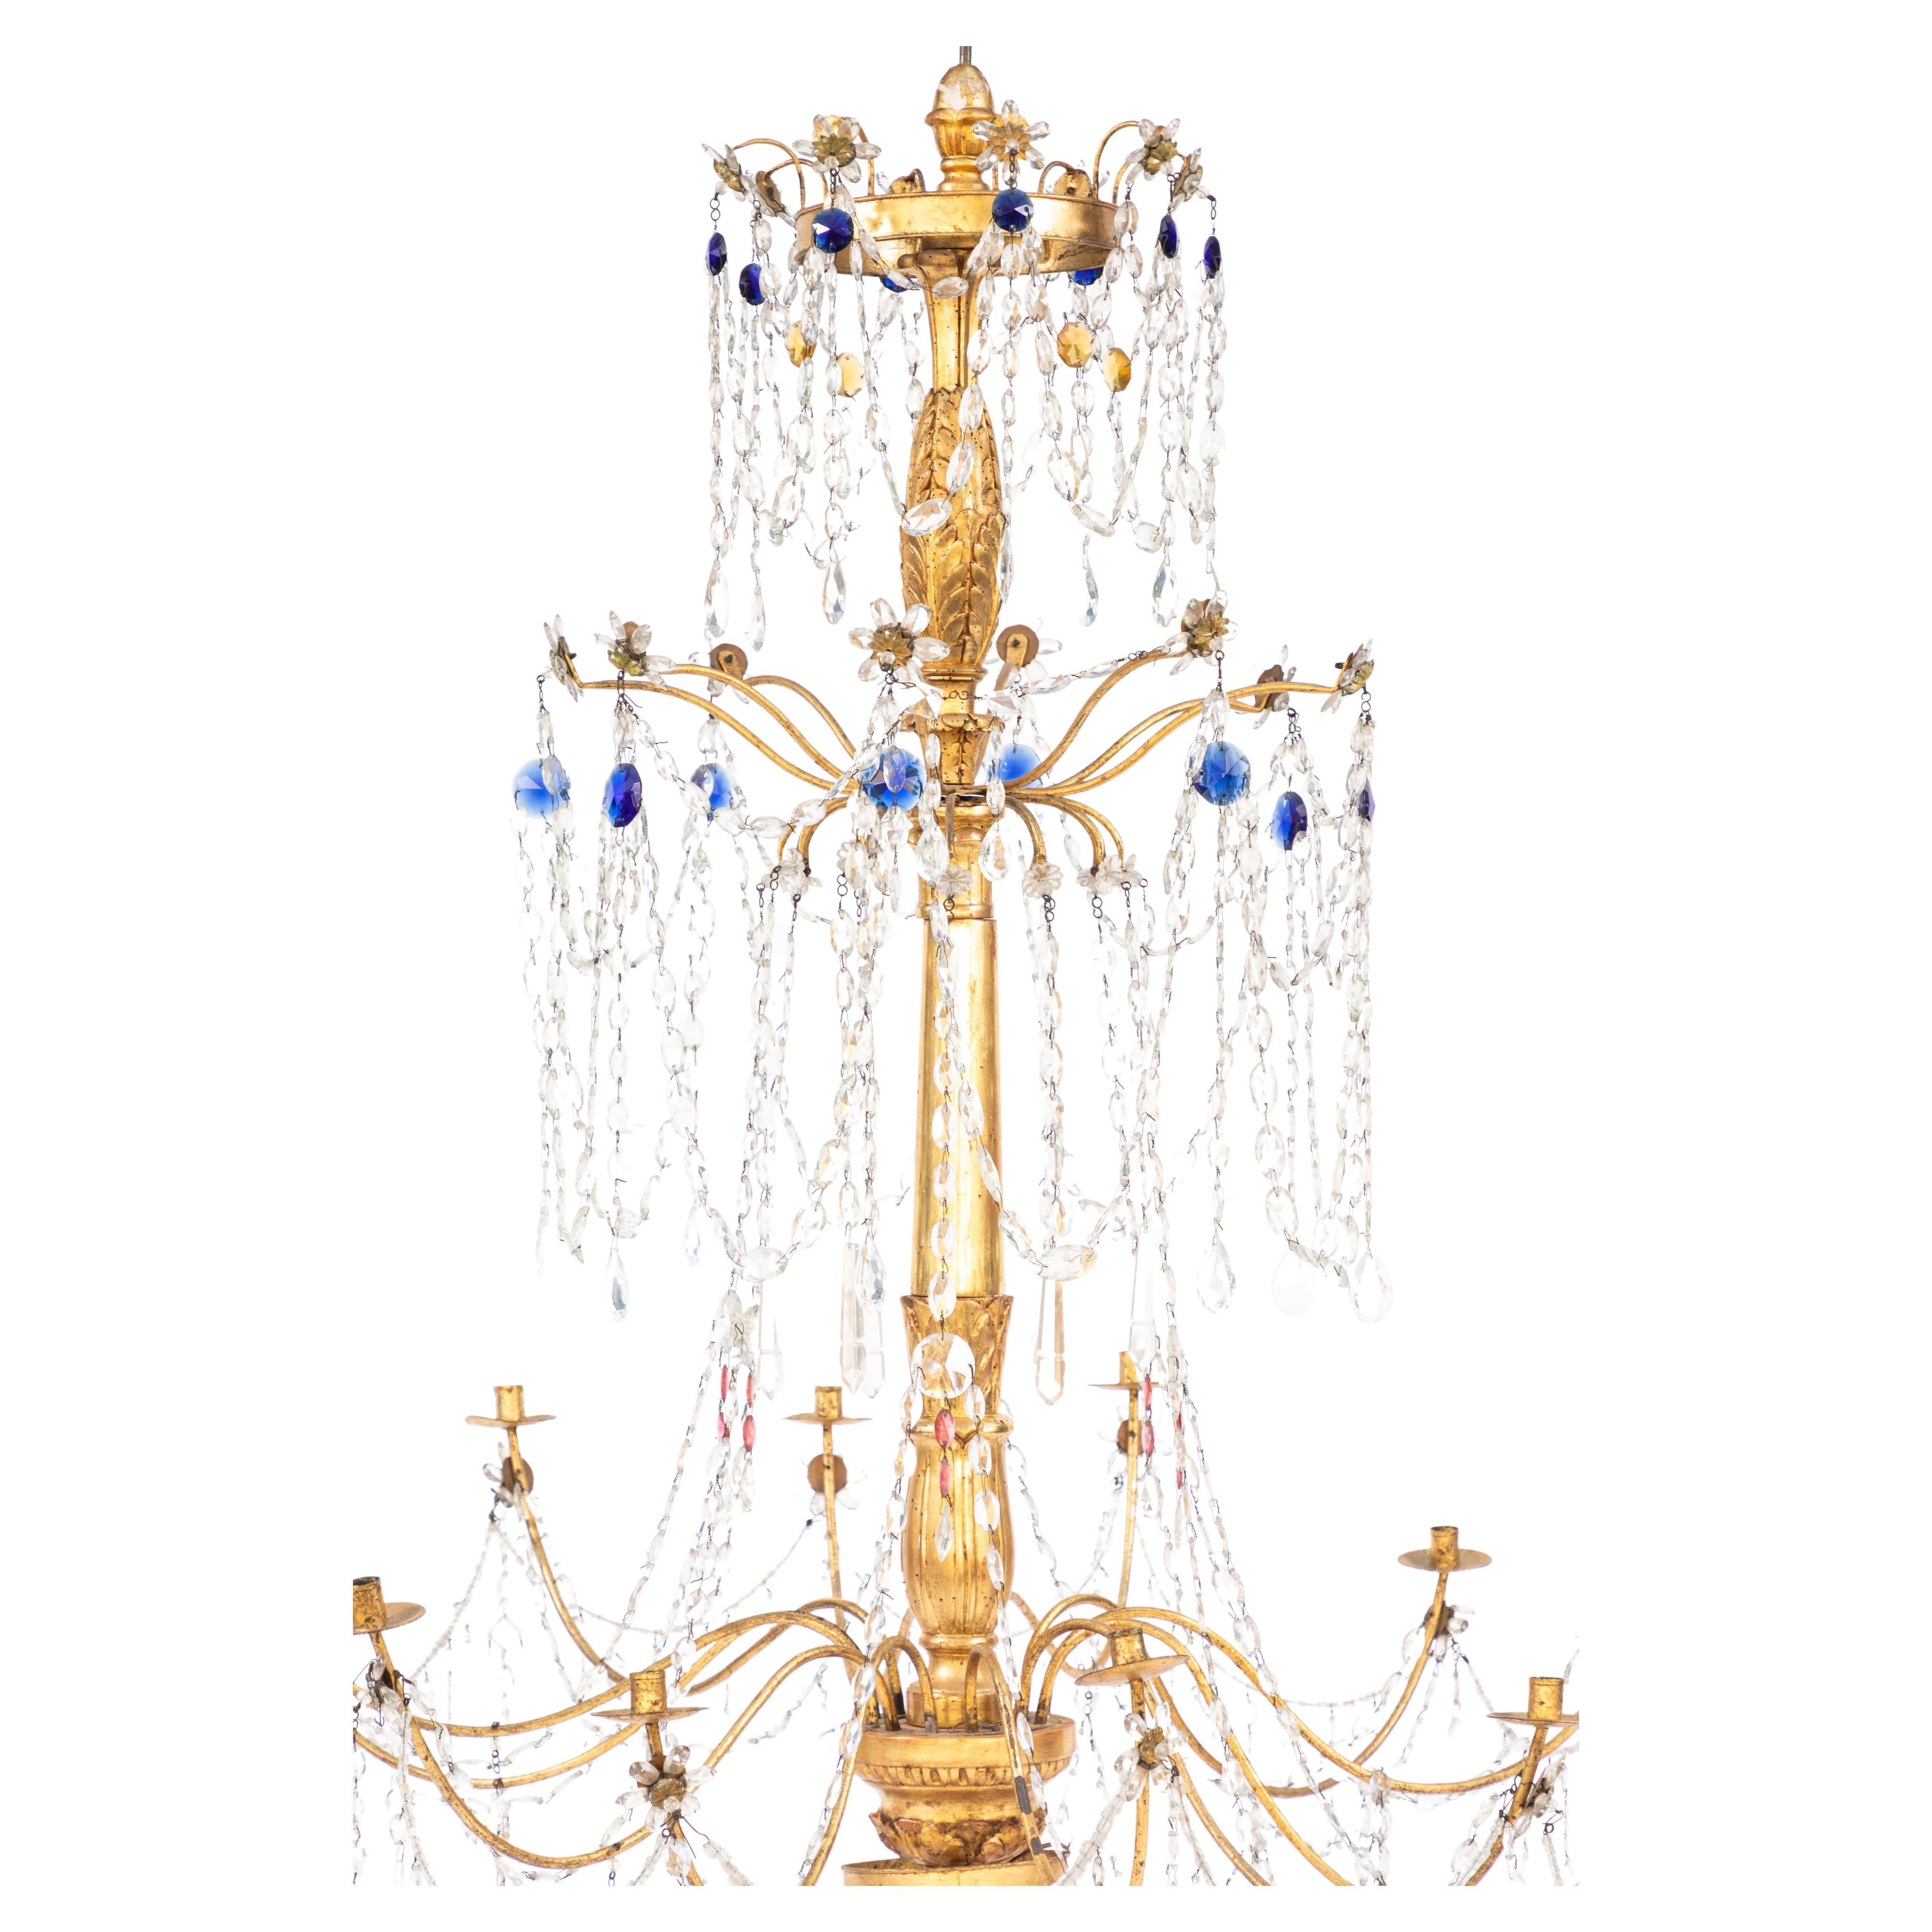  18th century Italian gilt wood and gilded iron chandelier with sapphire and ruby colored crystals. All hand knotted. Candle chandeliers have been electrified.  Pair available.  Some parts are modern, but most parts are antique, Italian elements.